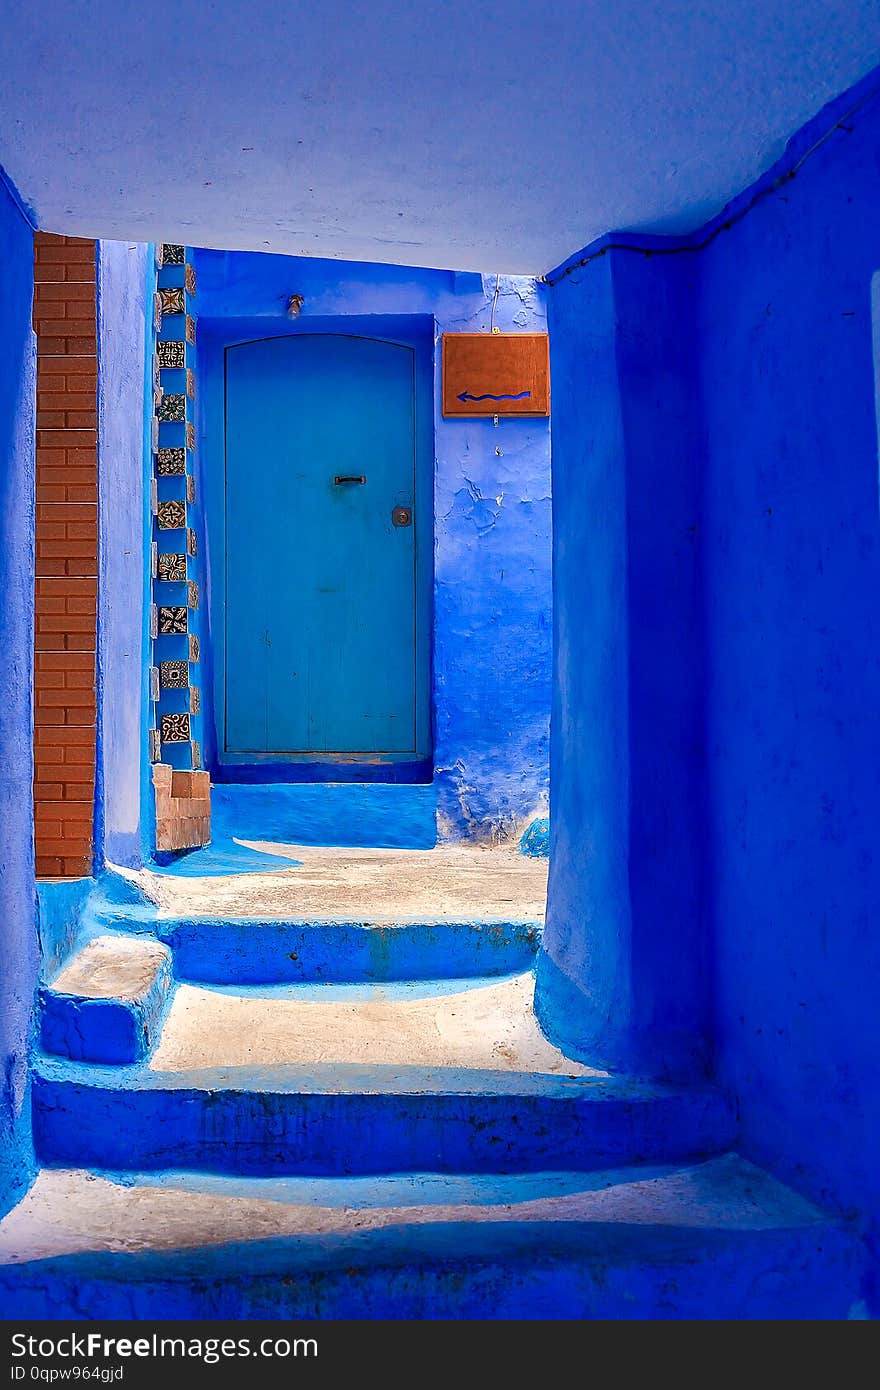 Chefchaouen, a city with blue painted houses. A city with narrow, beautiful, blue streets. Chefchaouen, Morocco, Africa